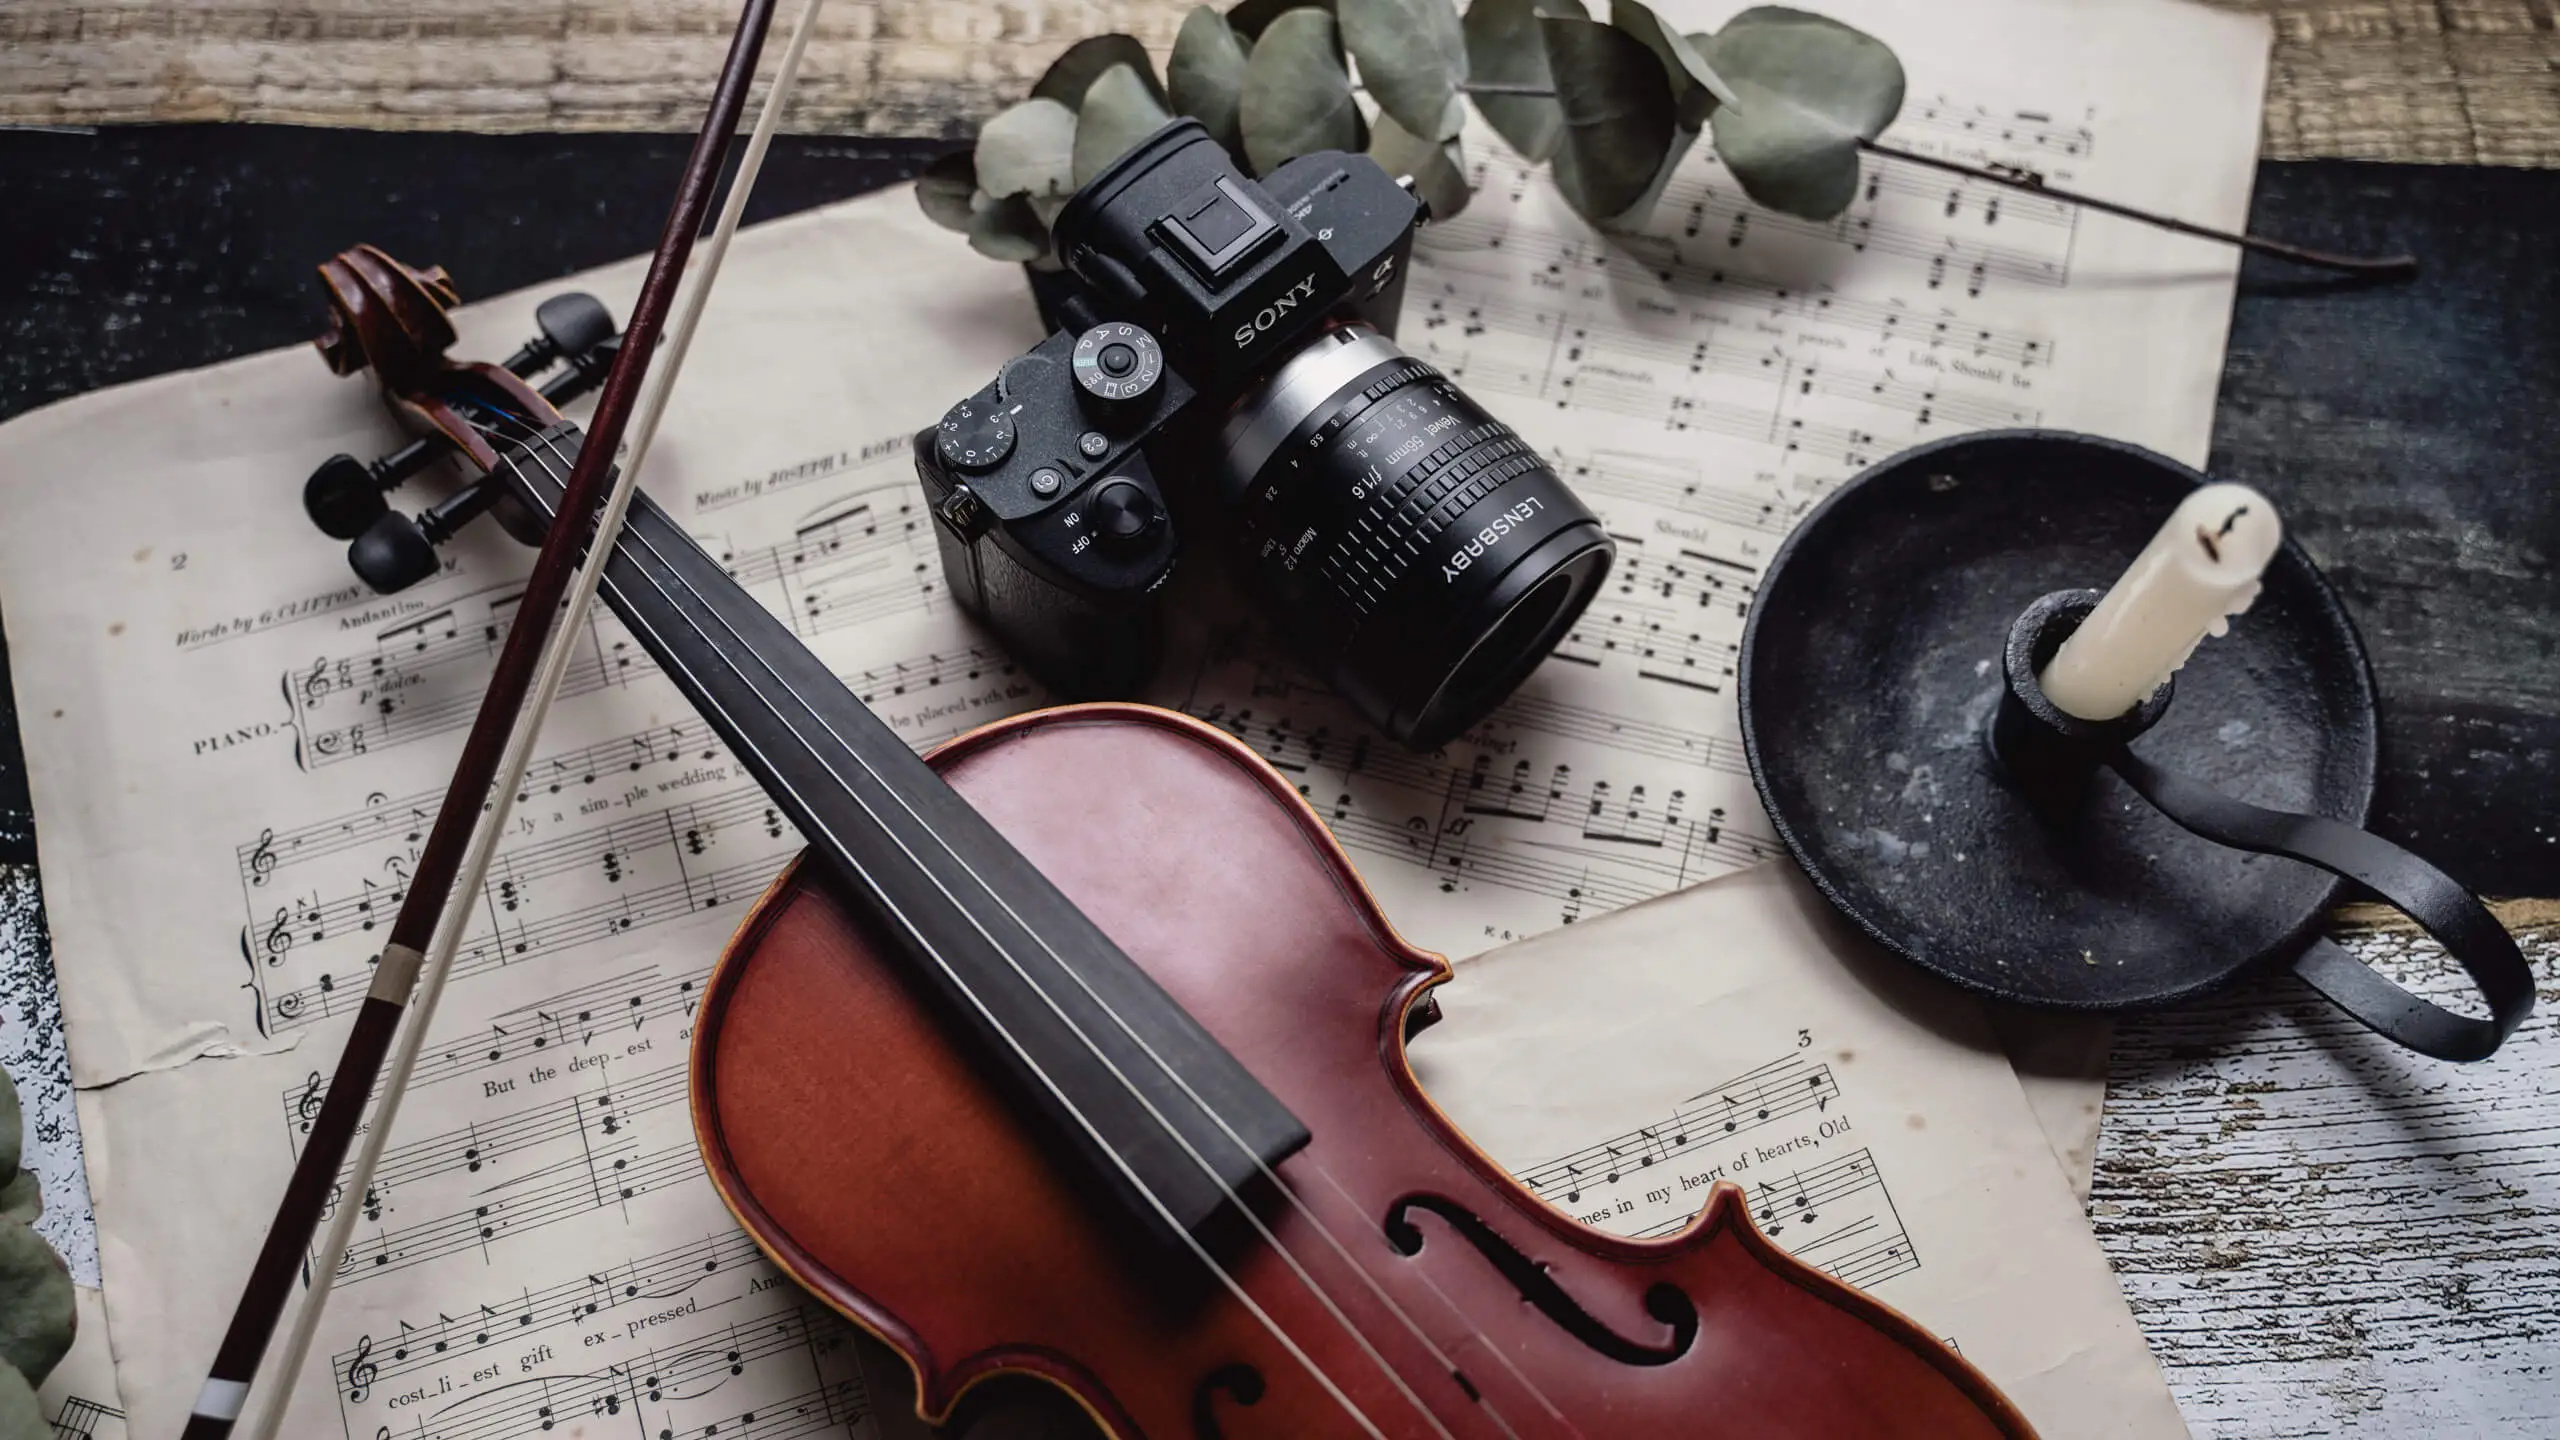 Viola: Classical Maple-Wood Instrument, Lower And Deeper Sound Than a Violin, Mirrorless Interchangeable-Lens Camera, Sony Alpha 7, Sheet Music. 2560x1440 HD Background.